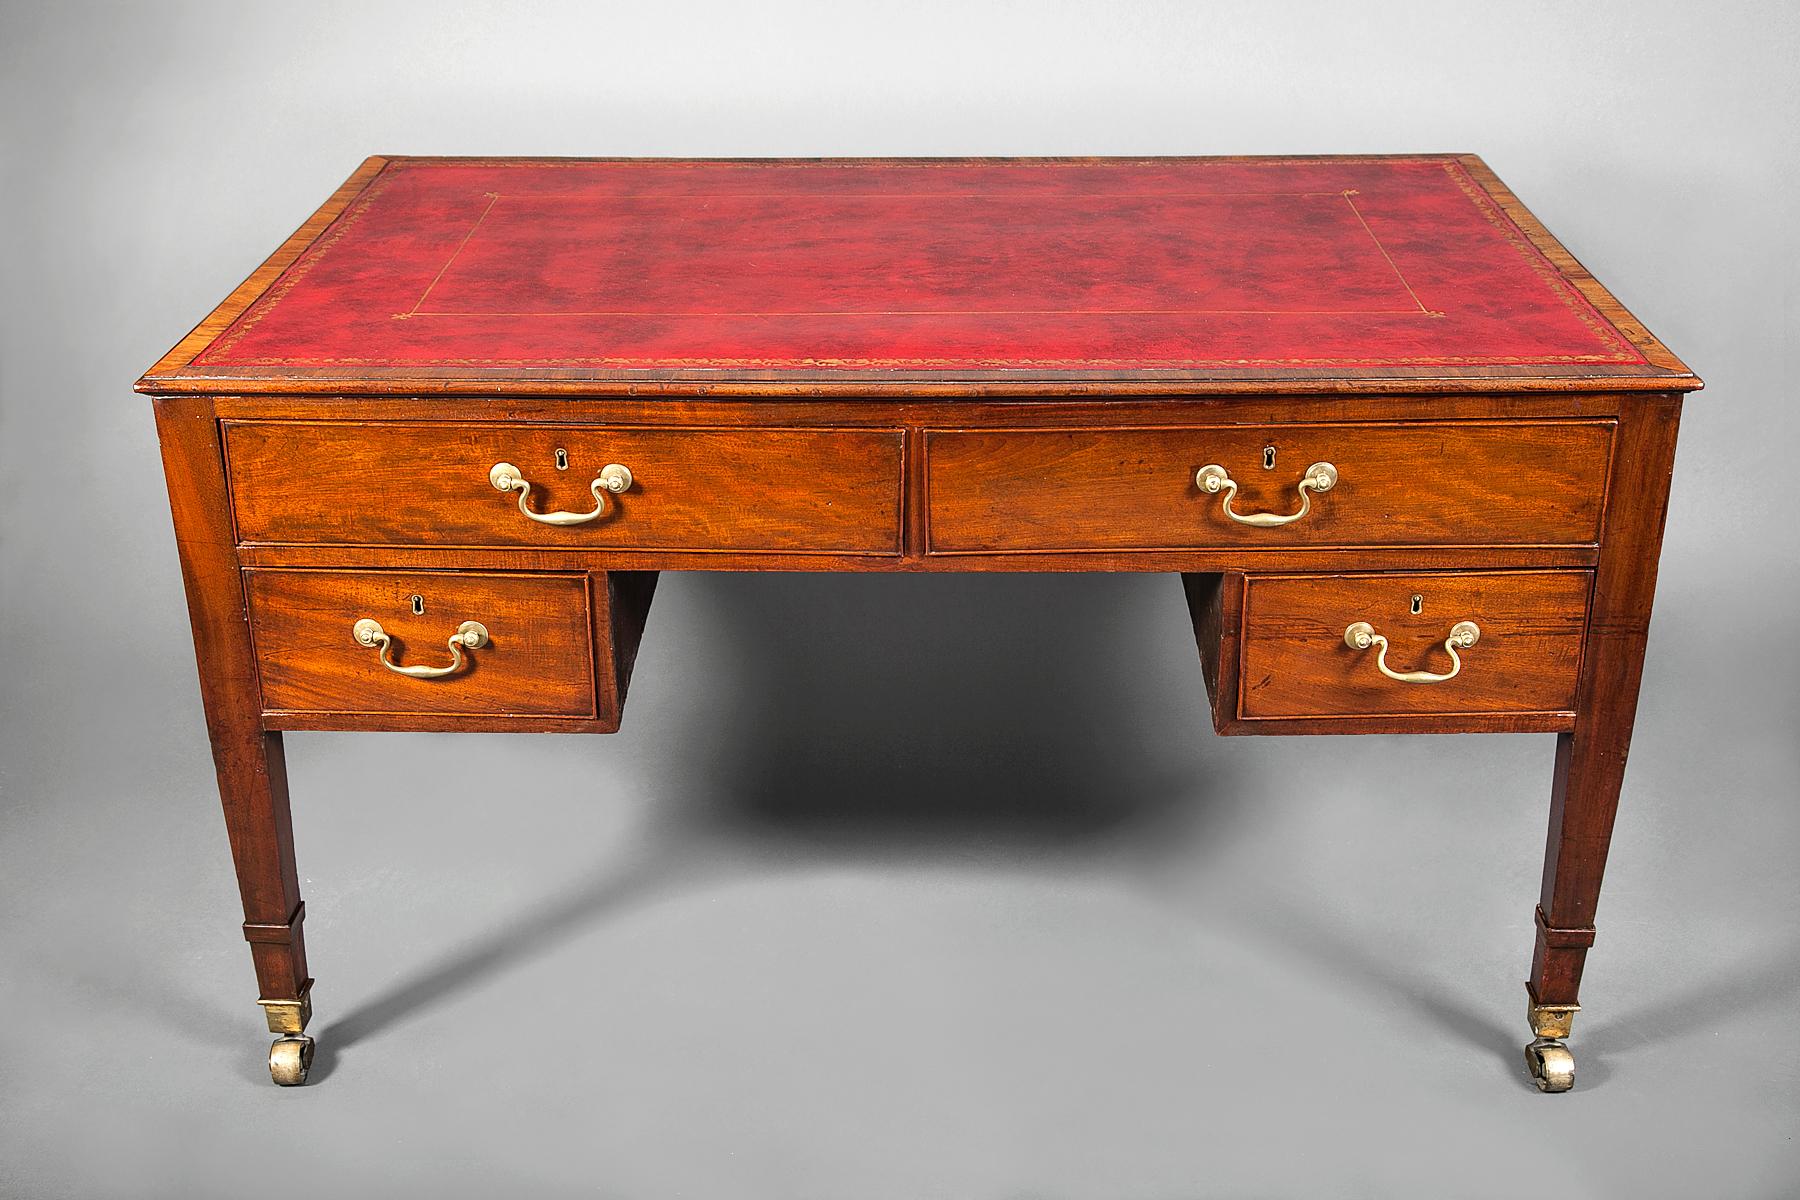 George III partners desk. Red leather and gilded trim top with bronze mounts. Four drawers on one side five drawers on the other.